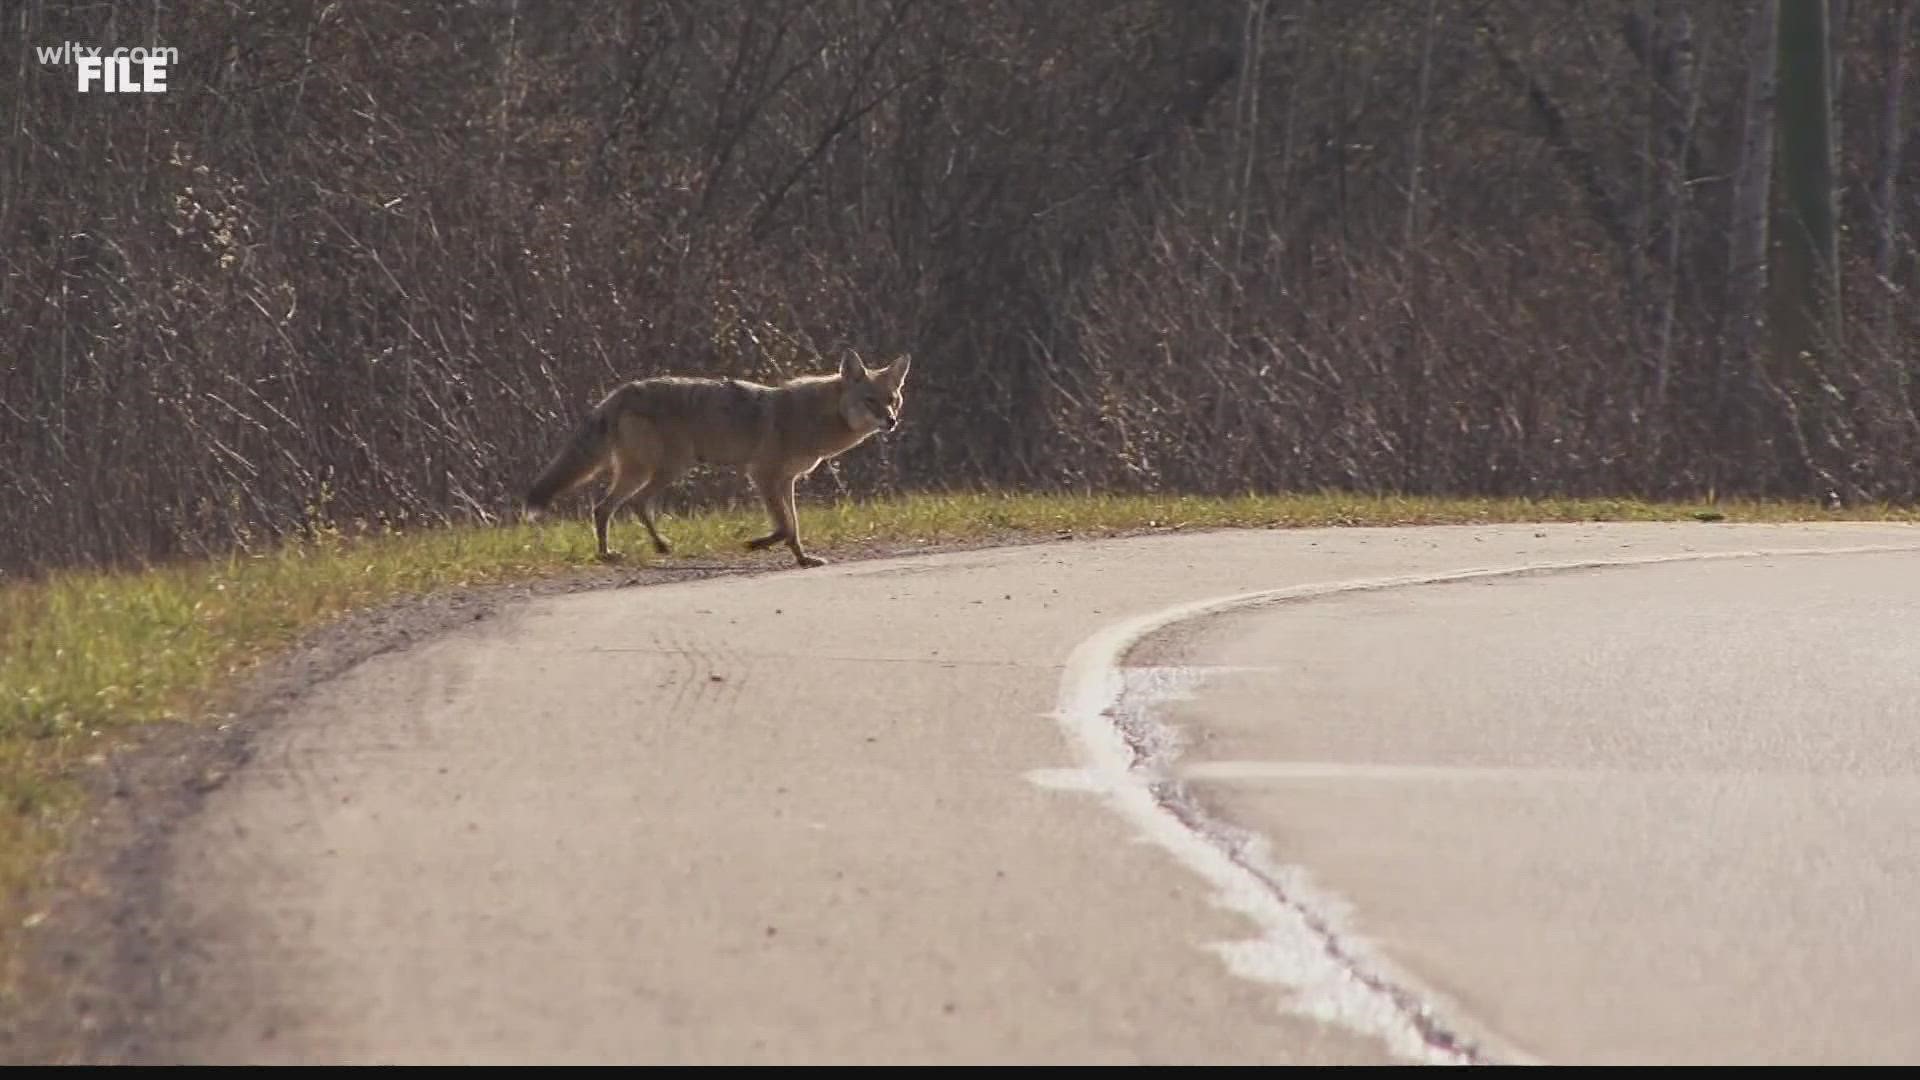 State wildlife leaders confirm the release of 16 tagged coyotes around the state. Any hunter who successfully reports one is rewarded a free lifetime license.